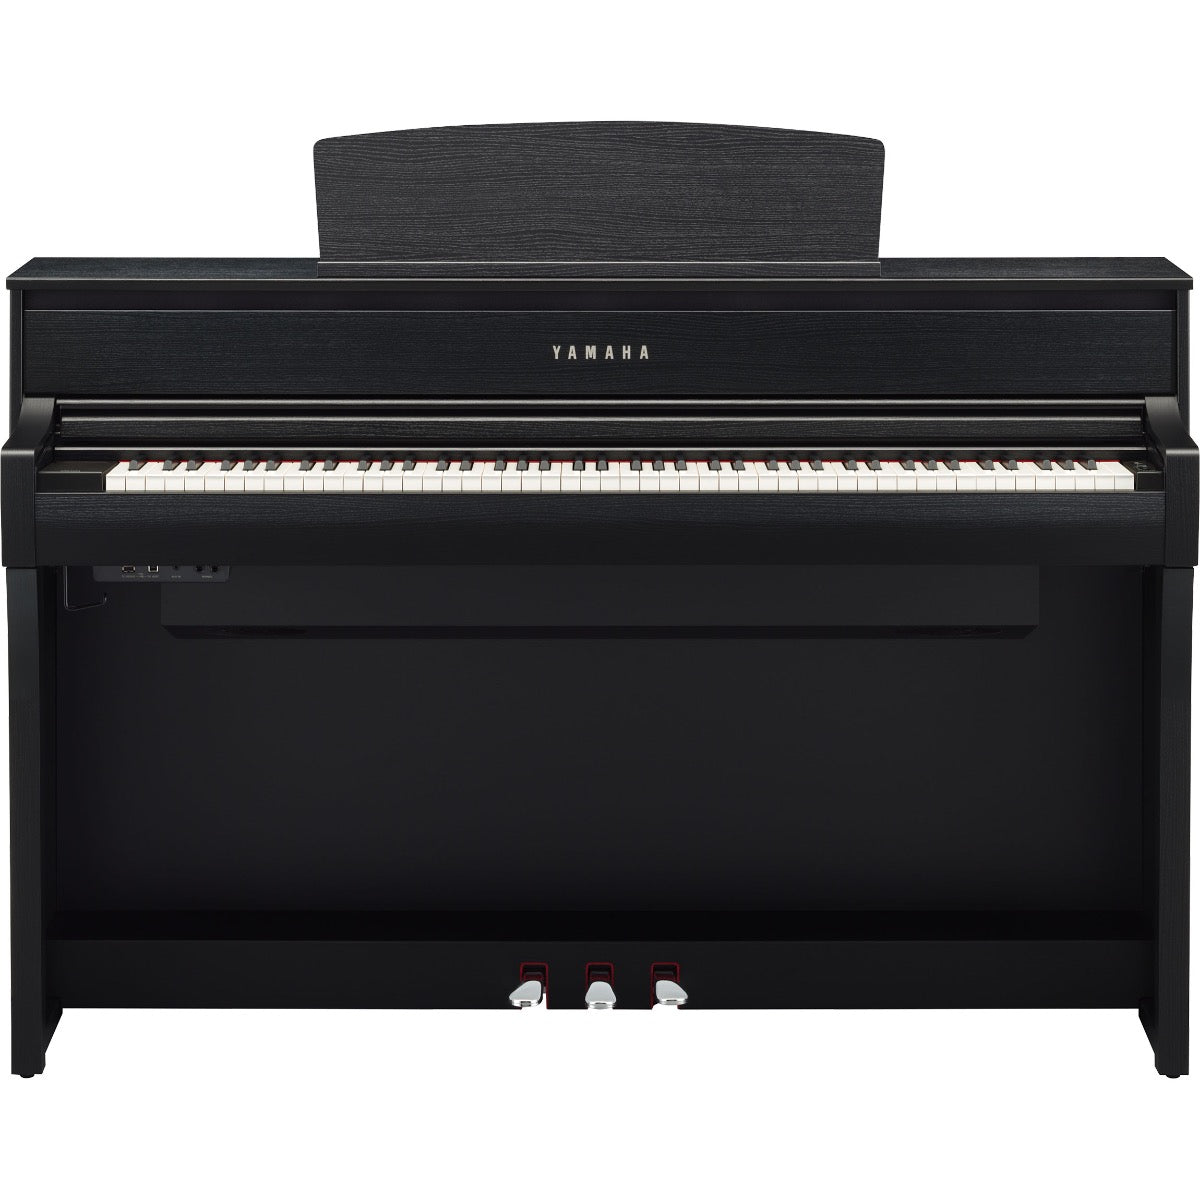 Perspective view of Yamaha Clavinova CLP-775 Digital Piano - Matte Black showing front and top